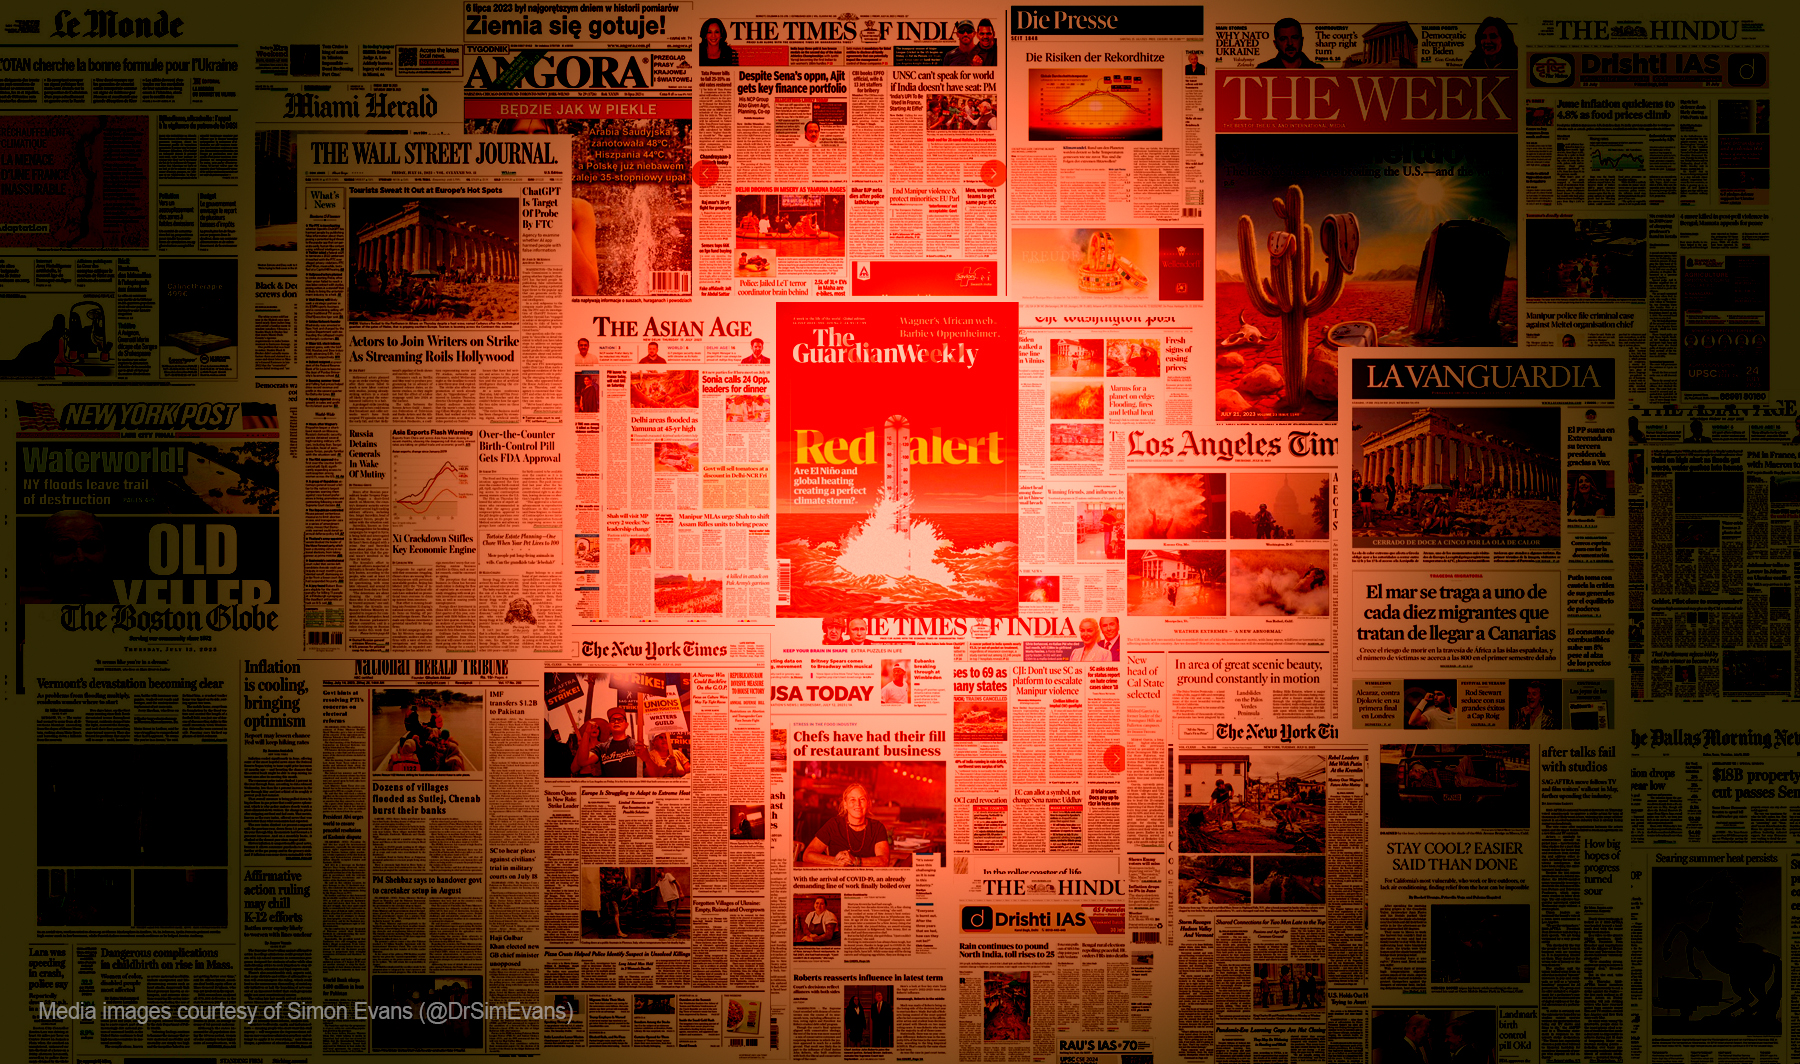 Front pages reflecting the heat. Image by Mitchell Ward, using images shared by Simon Evans